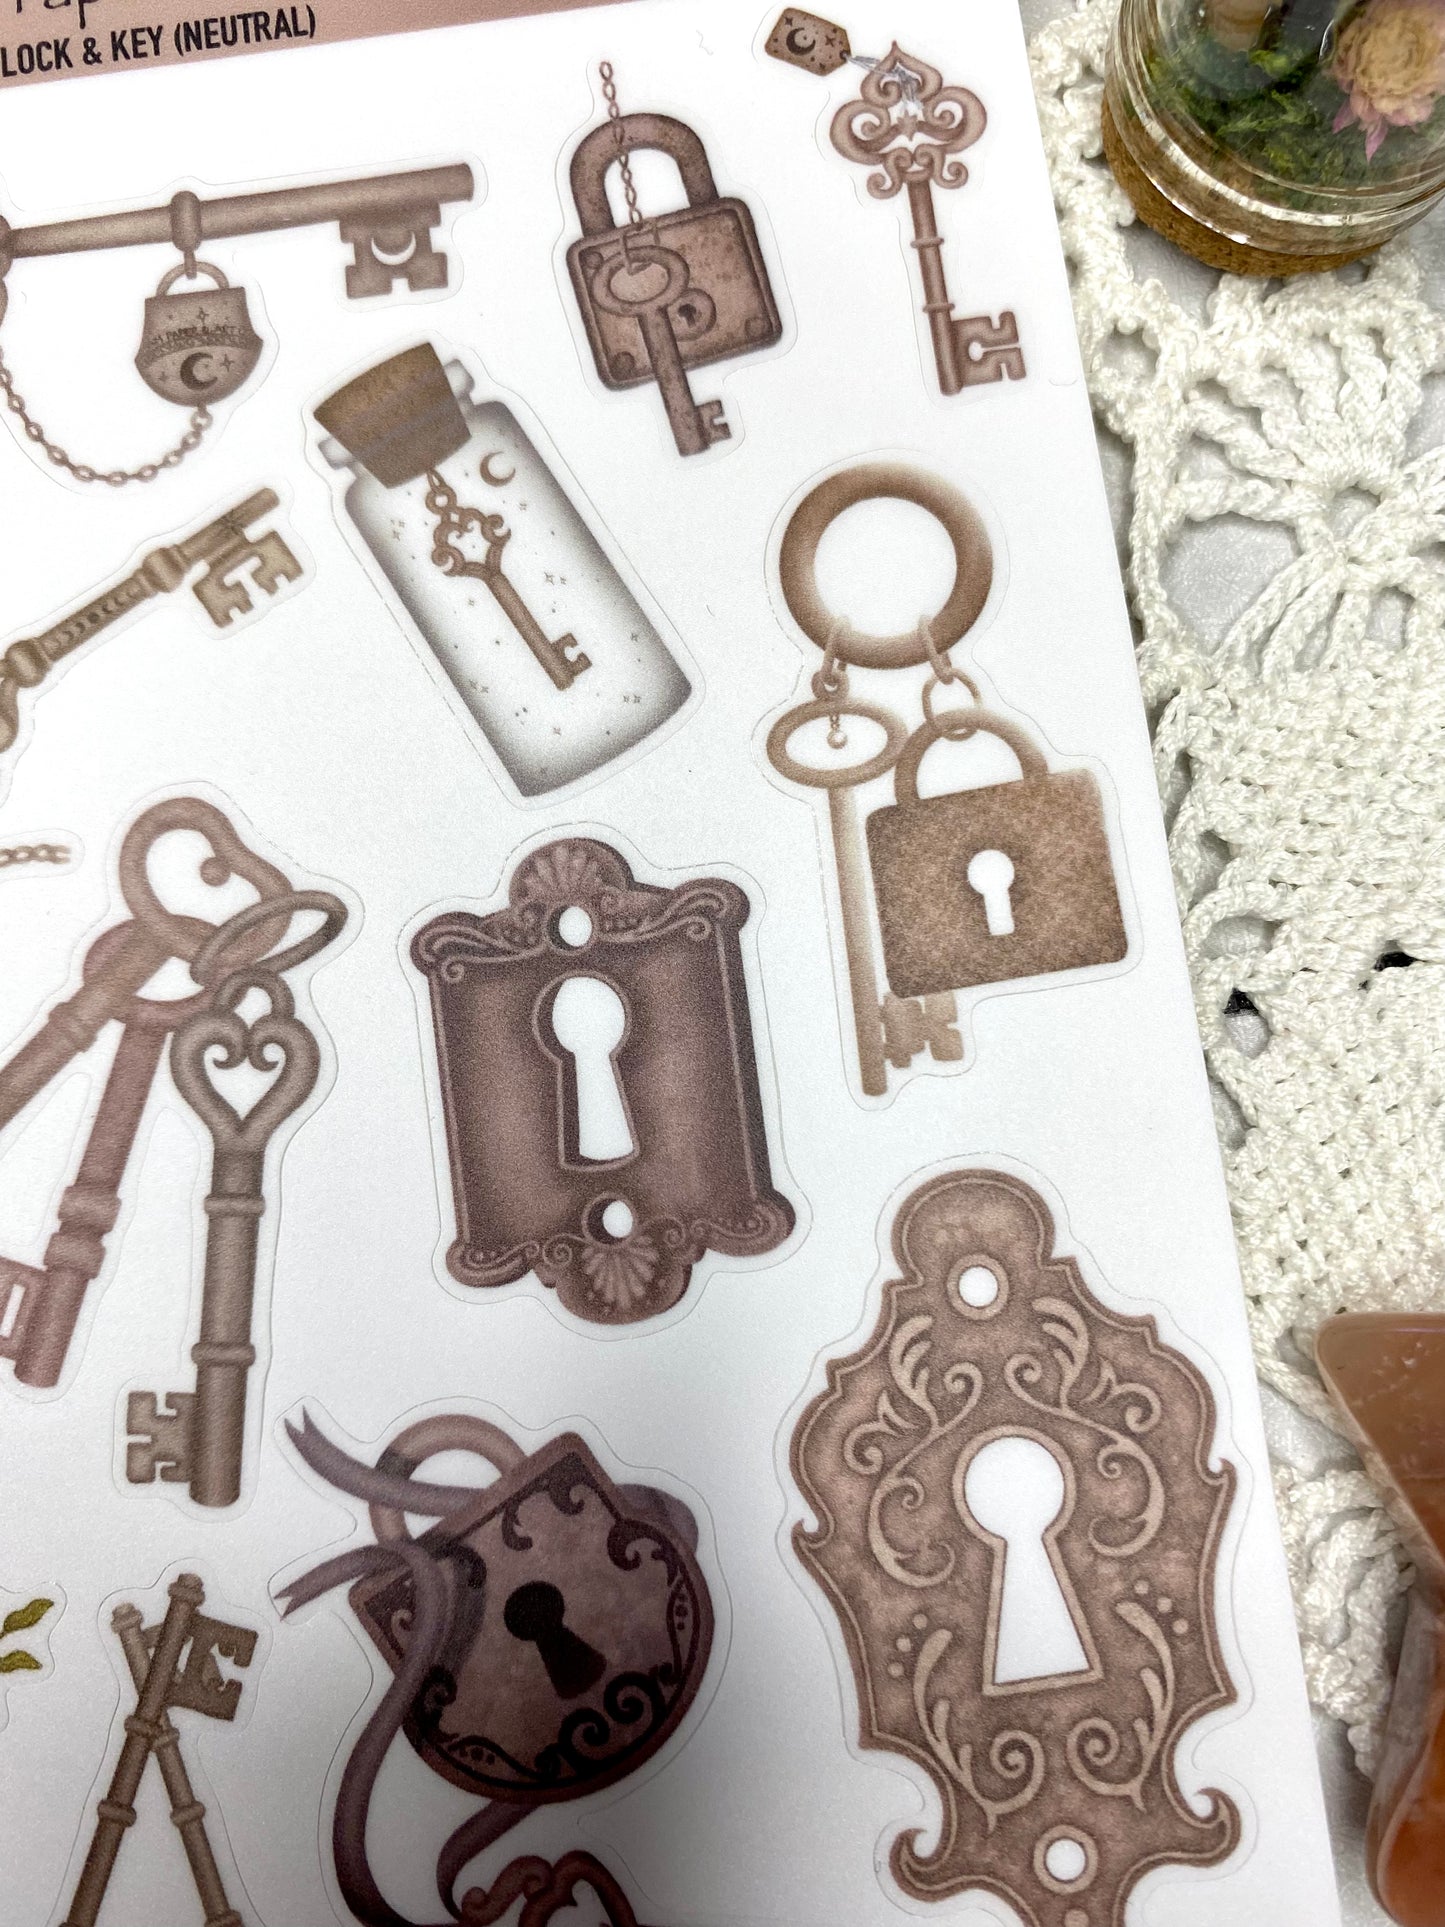 Lock & Key Stickers (Brown and Grey options)